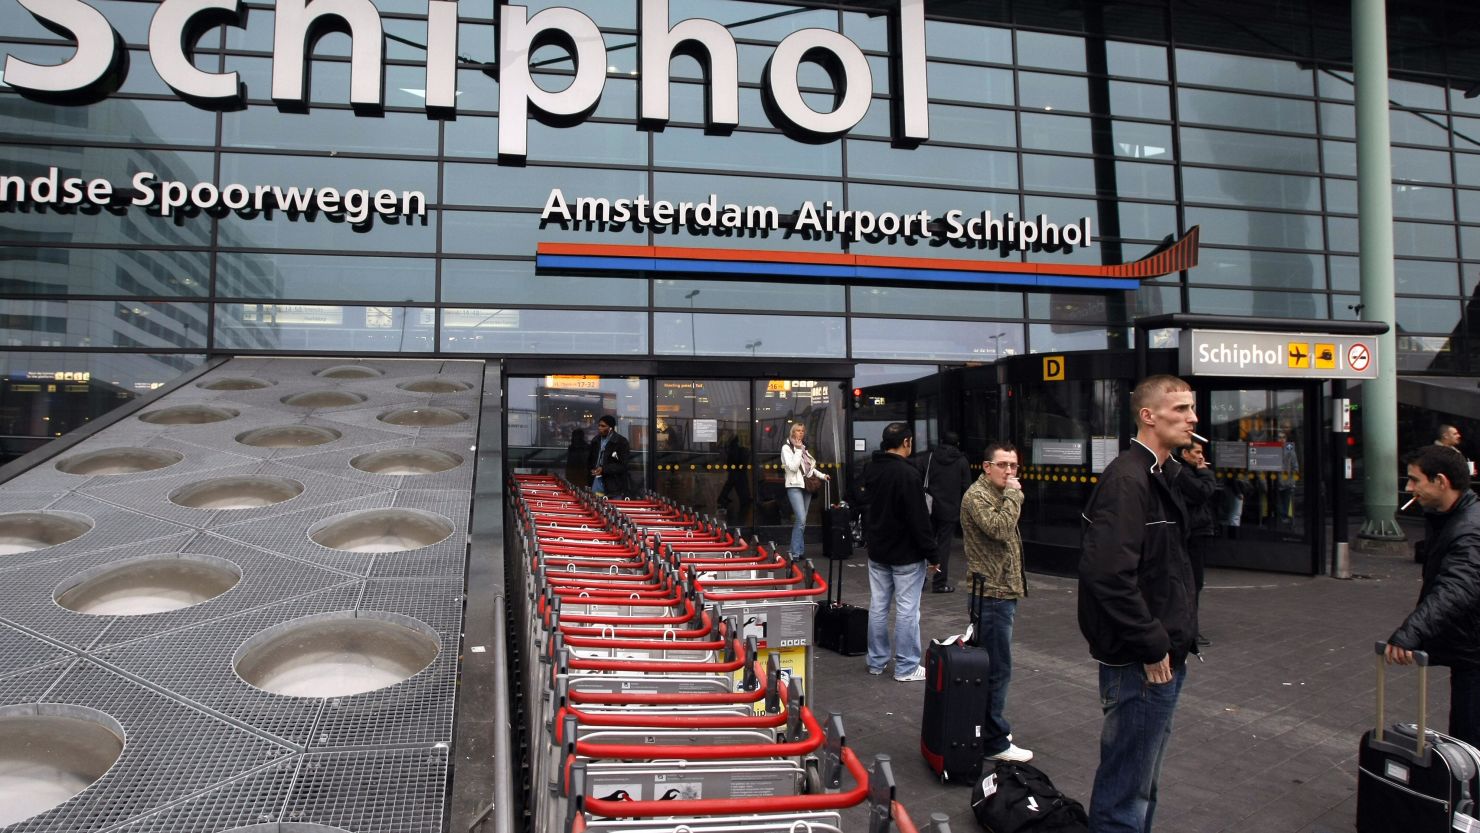 Portions of Schiphol Amsterdam airport have been evacuated to investigate a bomb threat